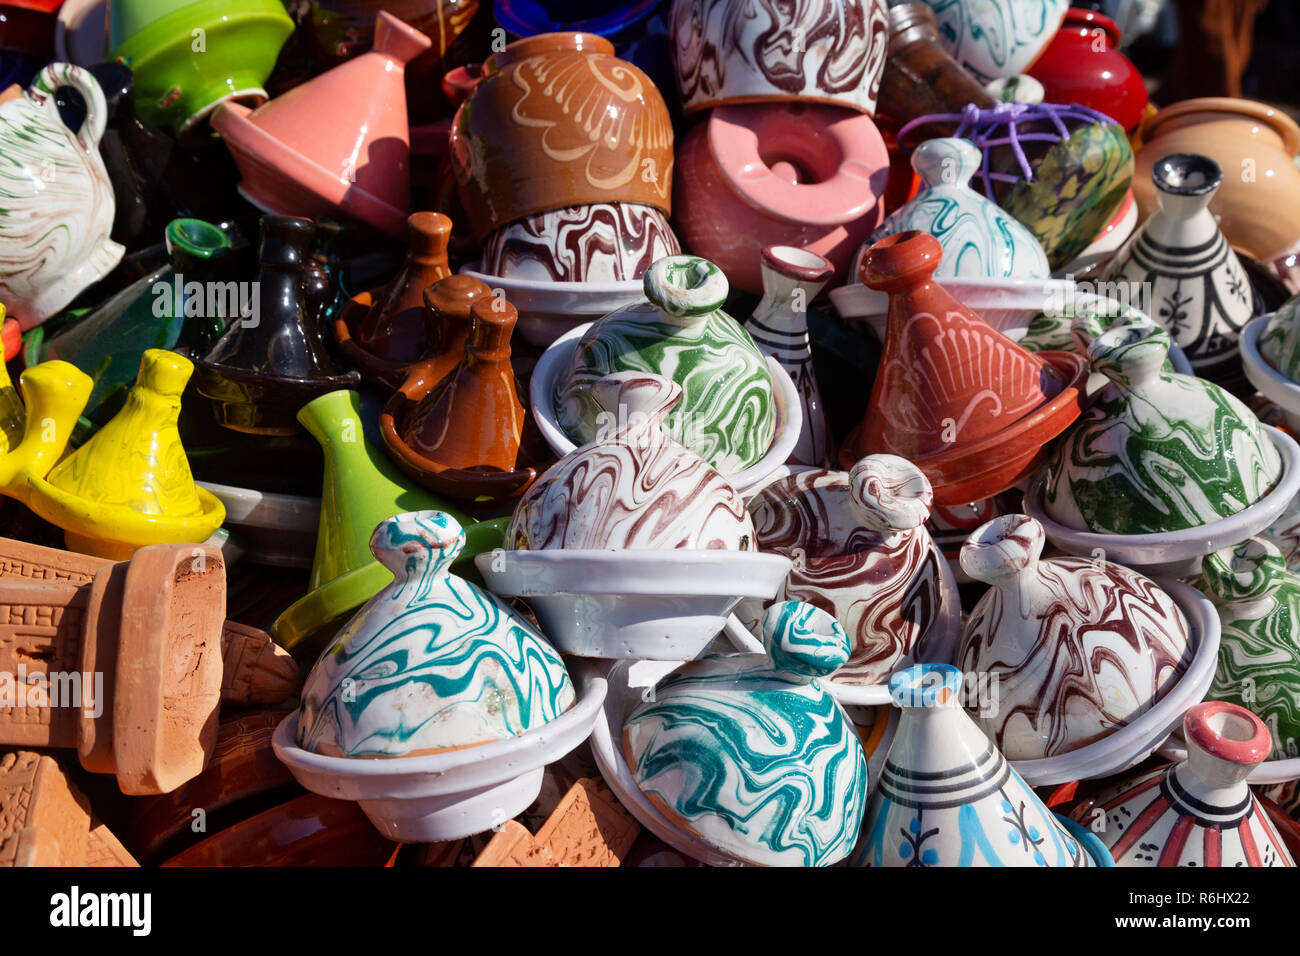 Morocco souvenirs - small pottery tagines for sale as gifts and souvenirs, Marrakesh souk, the medina, Marrakech Morocco North Africa Stock Photo